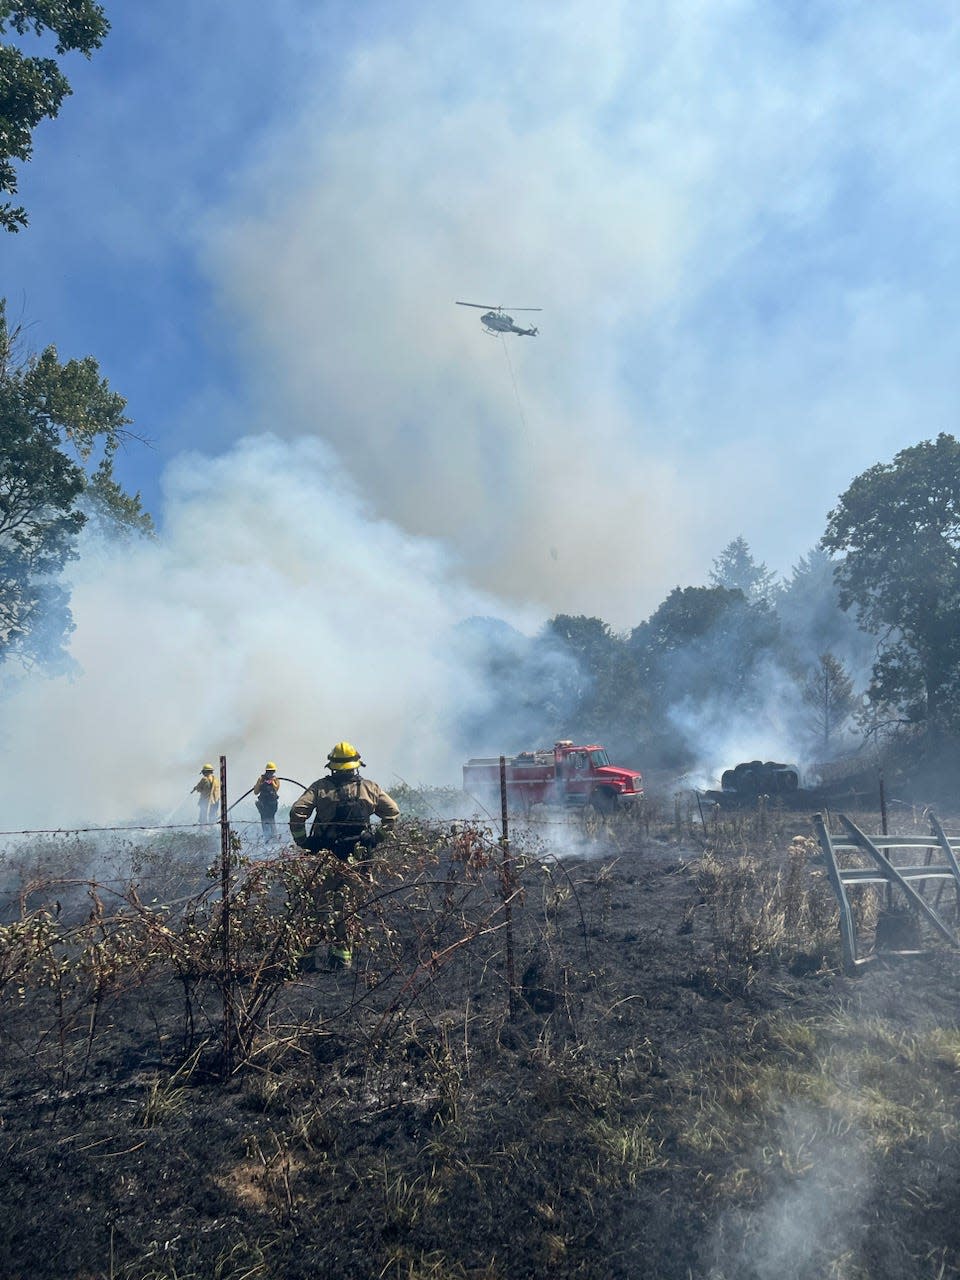 Firefighters work to extinguish the Sodaville Cutoff Fire in a partially harvested field south of Lebanon that threatened numerous homes Tuesday.